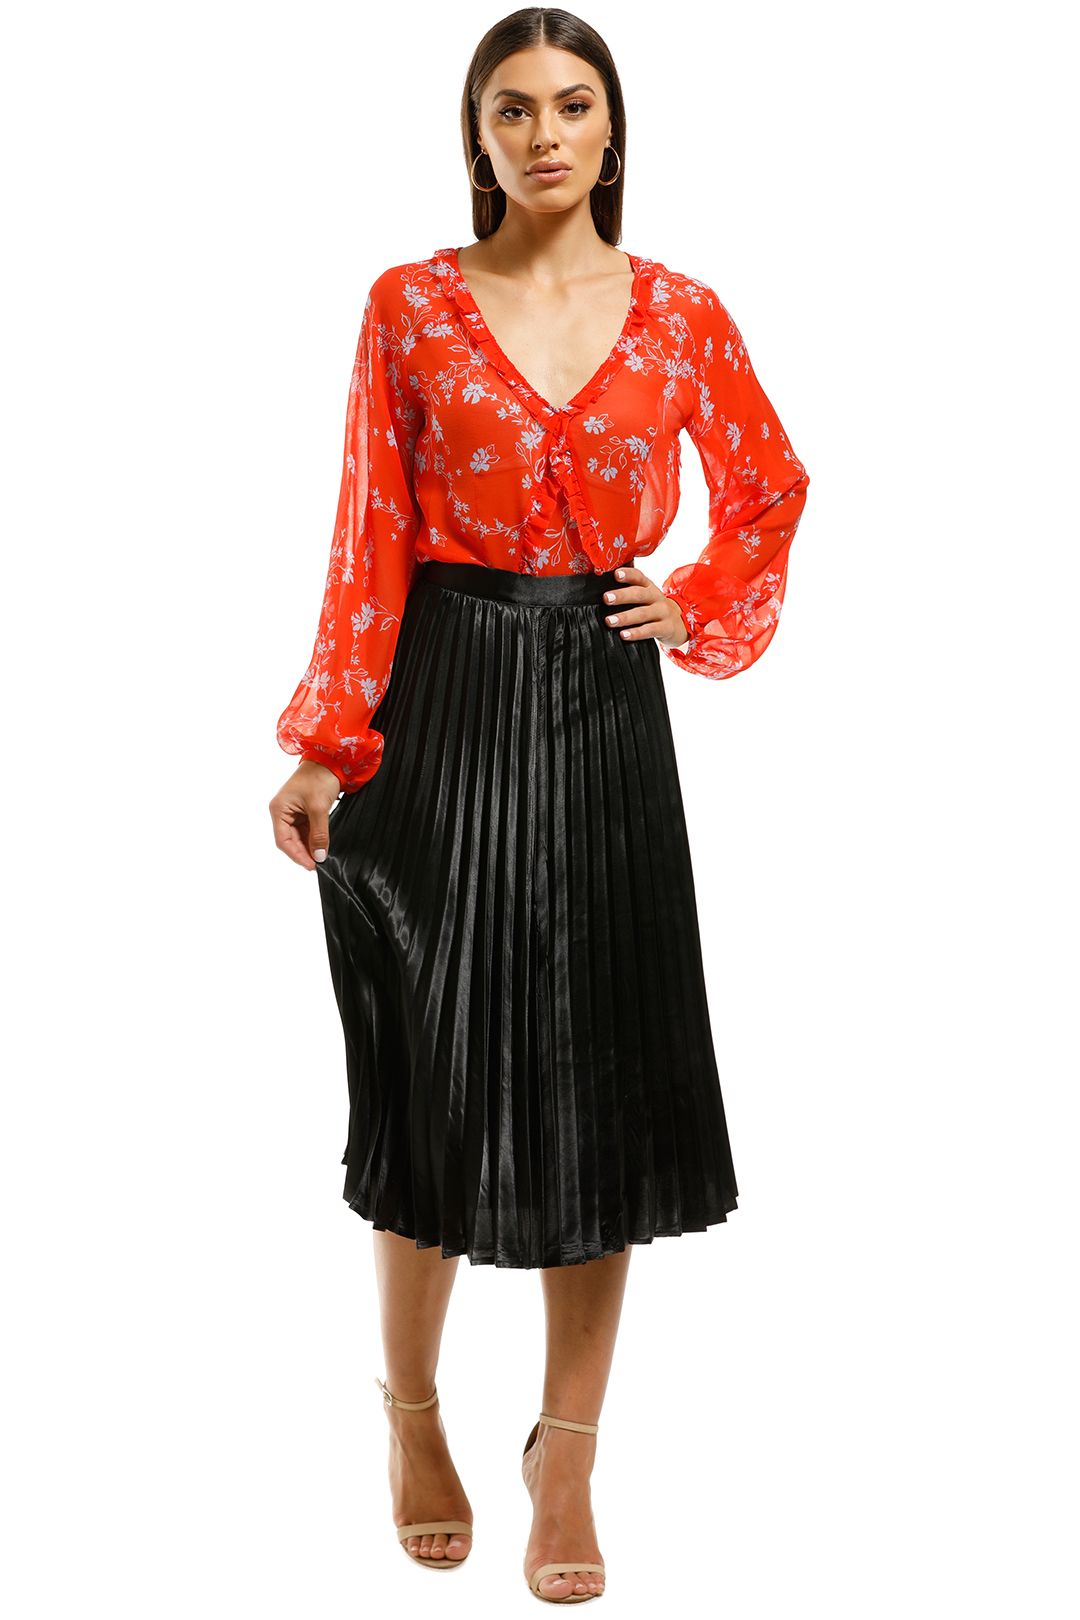 Tie Back Ruffle Blouse in Poppy by Nicholas for Rent